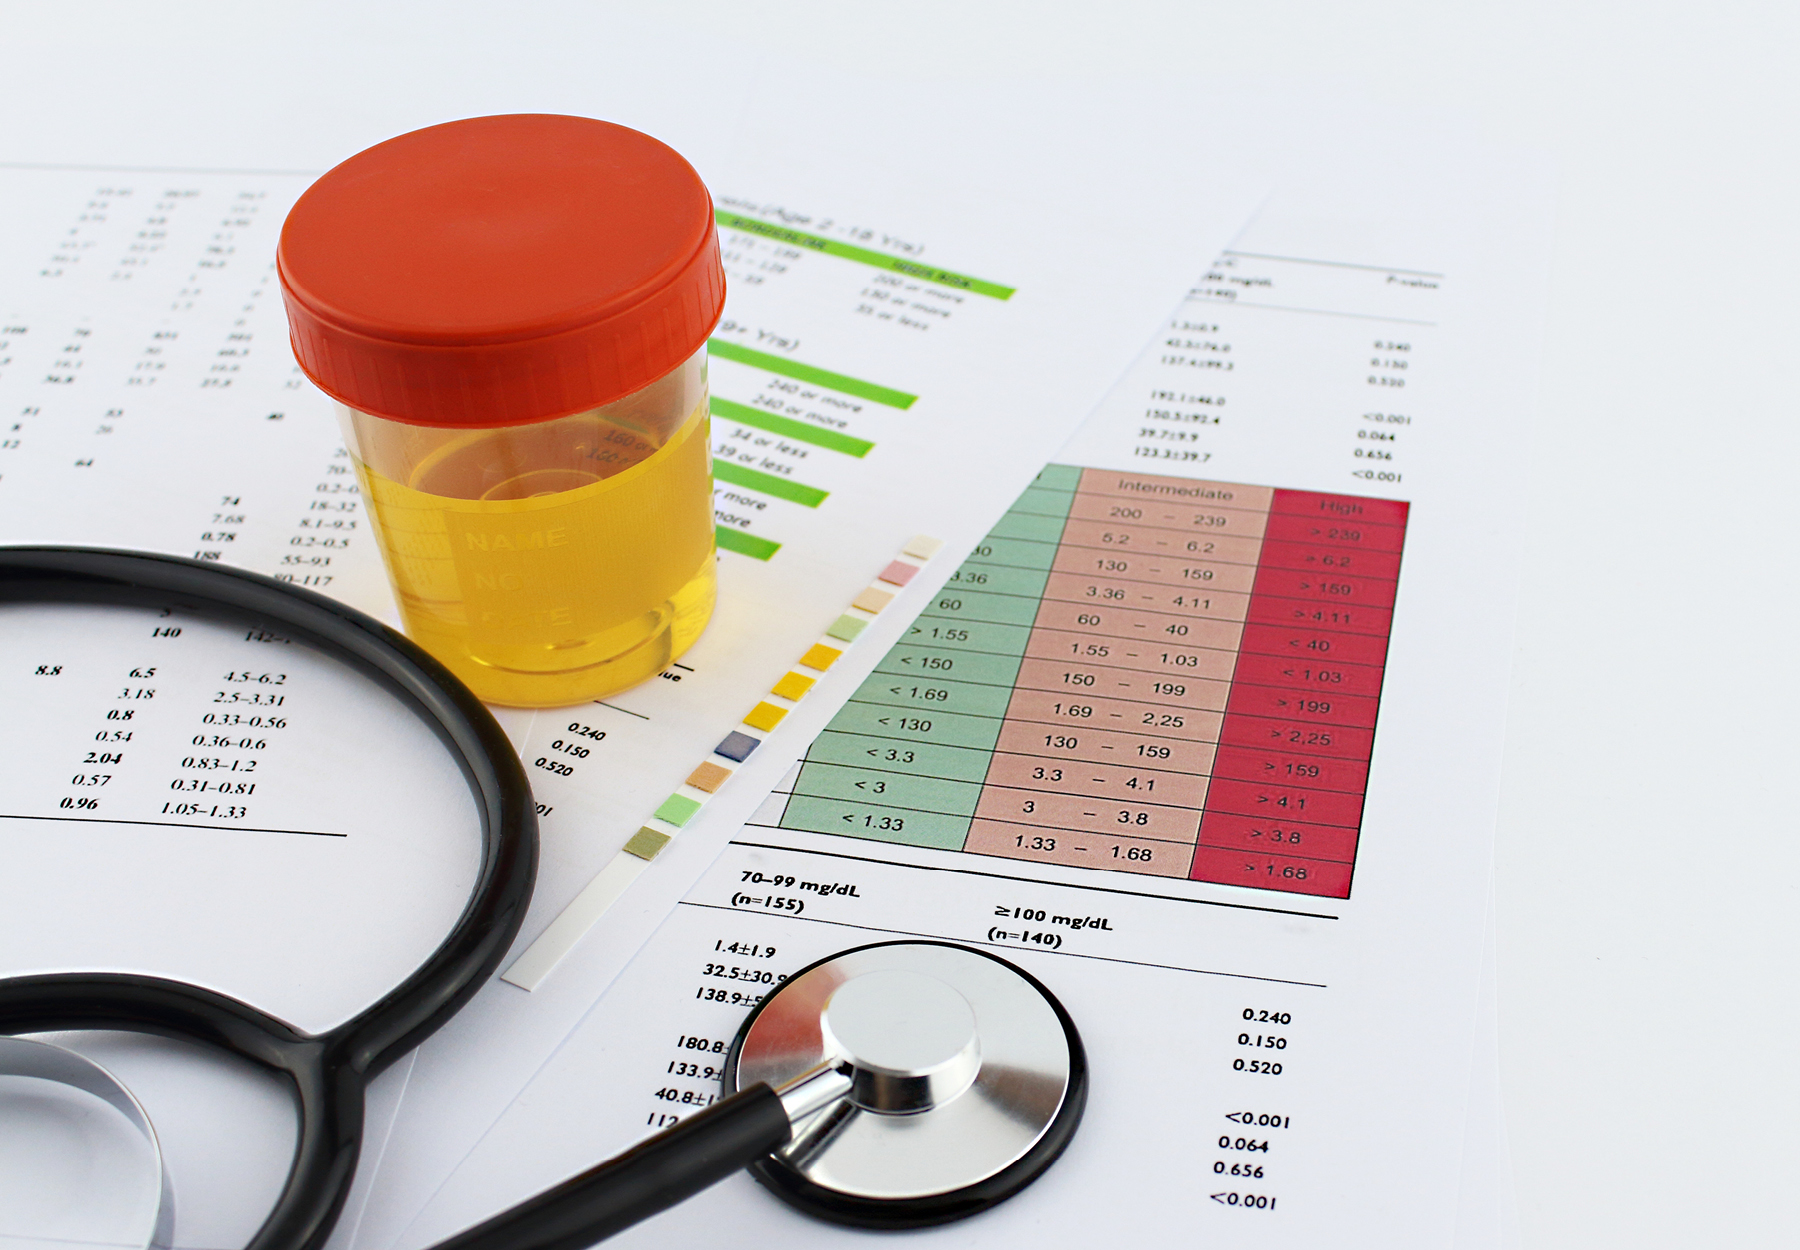 Closeup of urine sample in container near stethoscope and paperwork on table. iStock image.